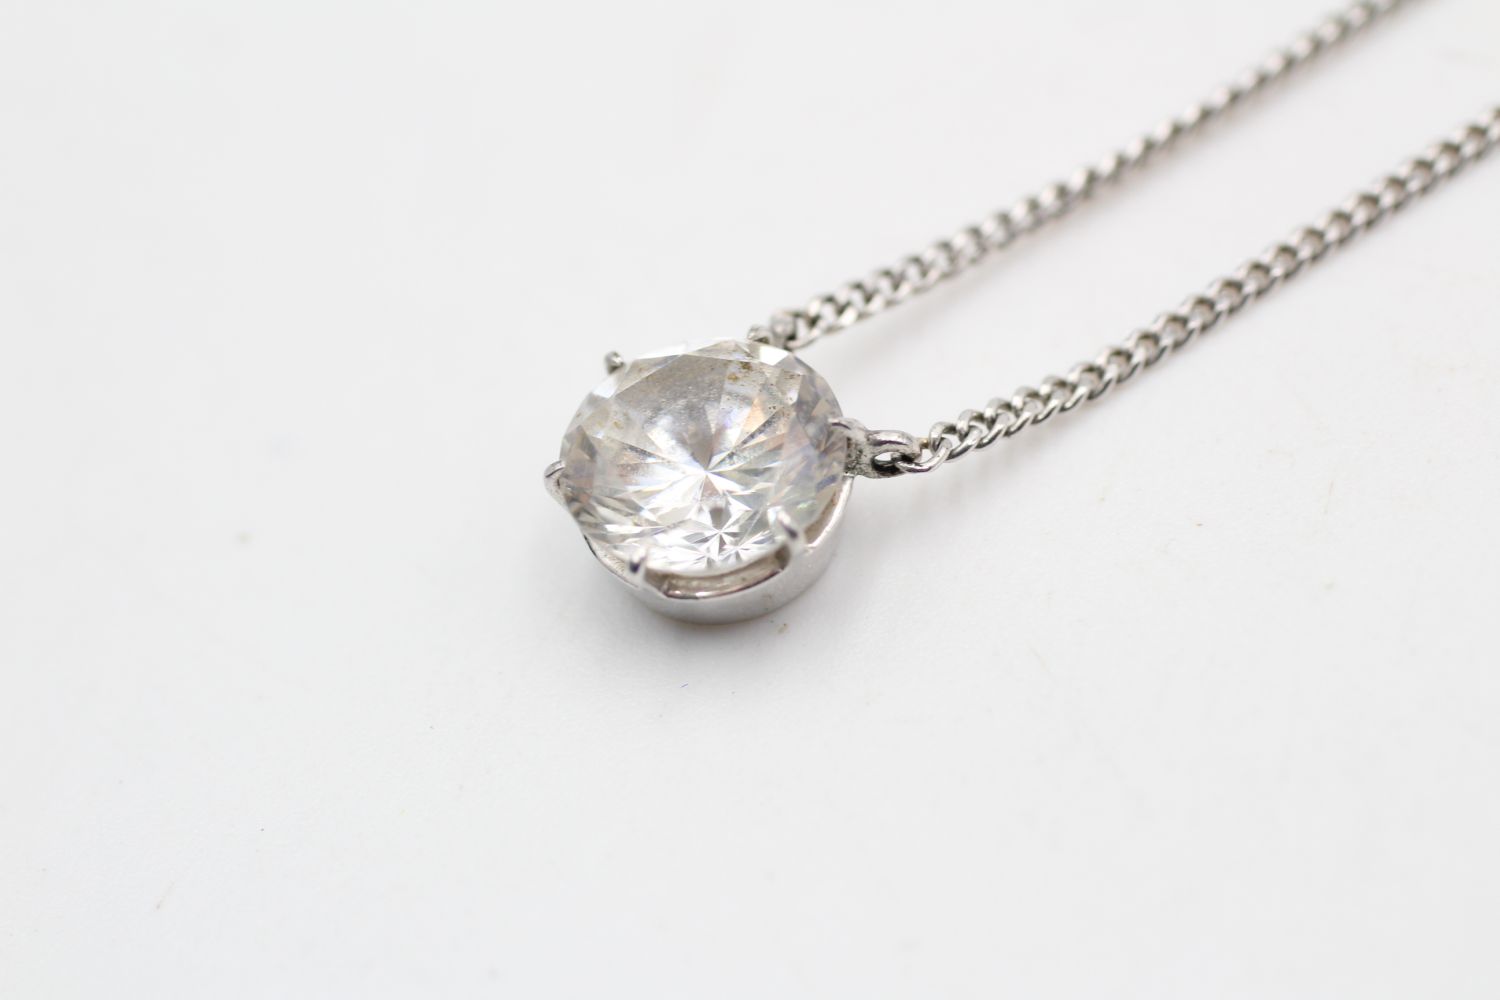 14ct white gold clear gemstone solitaire pendant necklace by UNOAERRE (4.4g) - Image 2 of 4